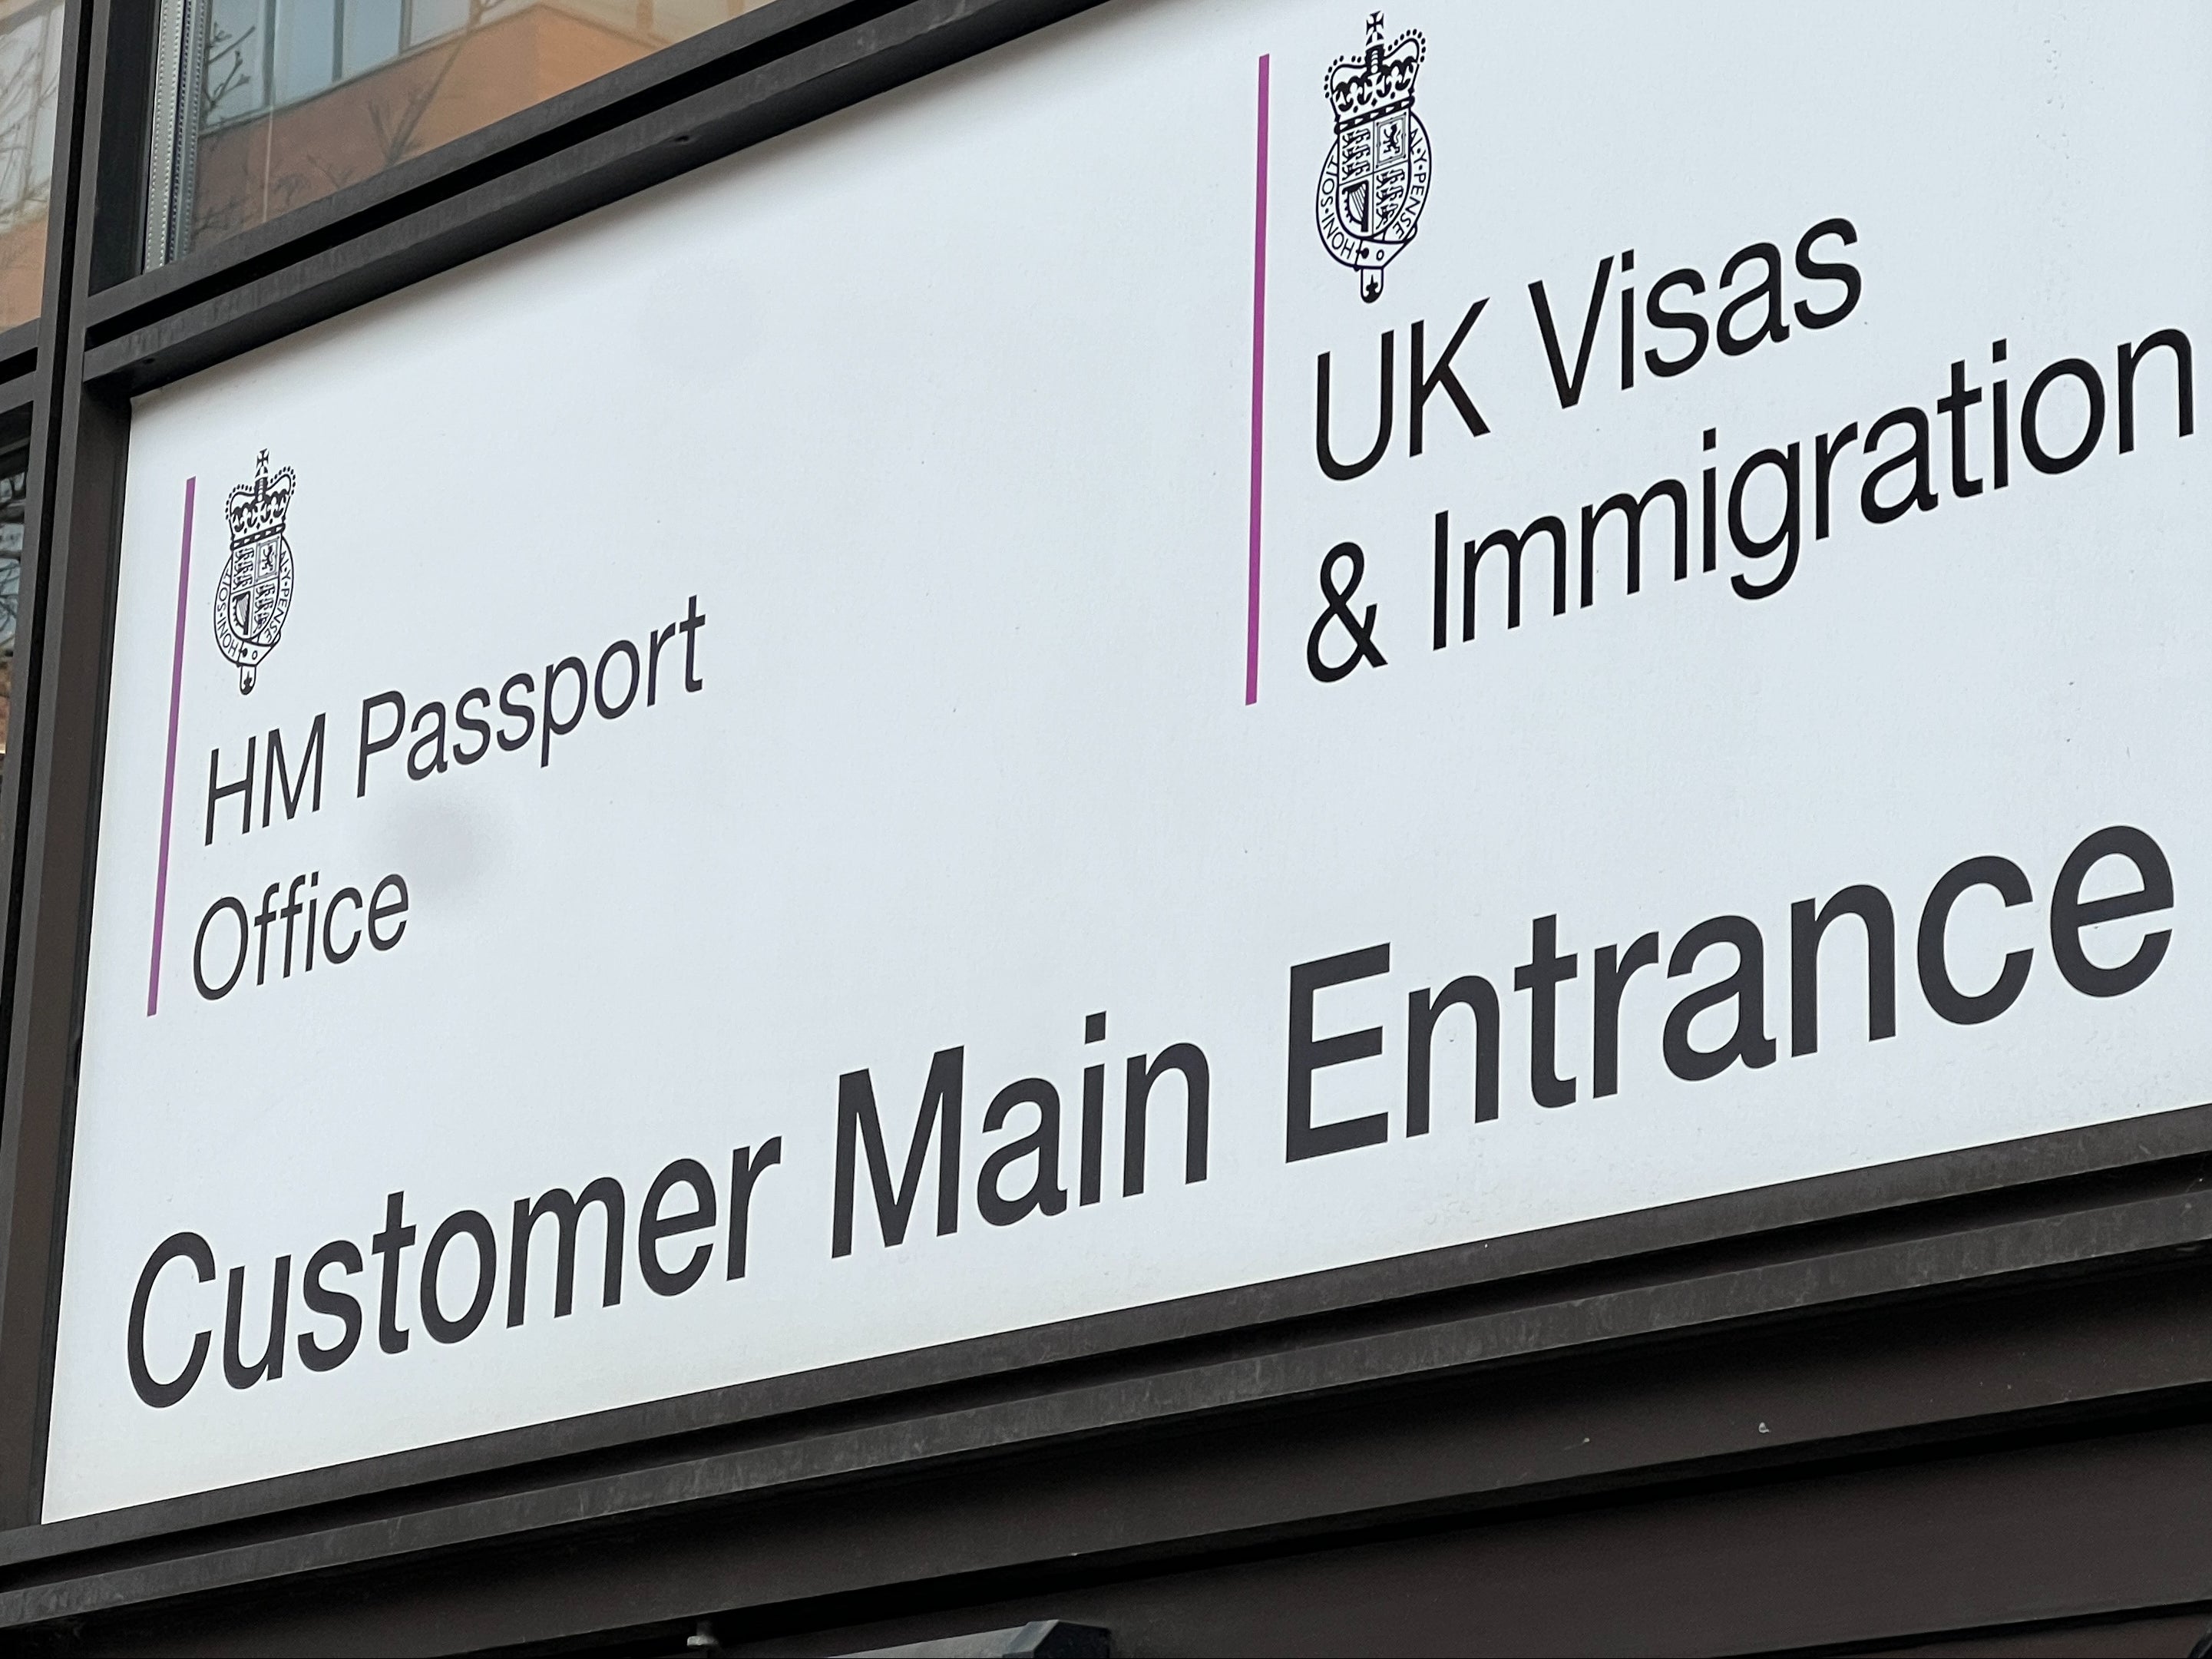 Distant dream: Belfast passport office has far more appointments than locations in Great Britain